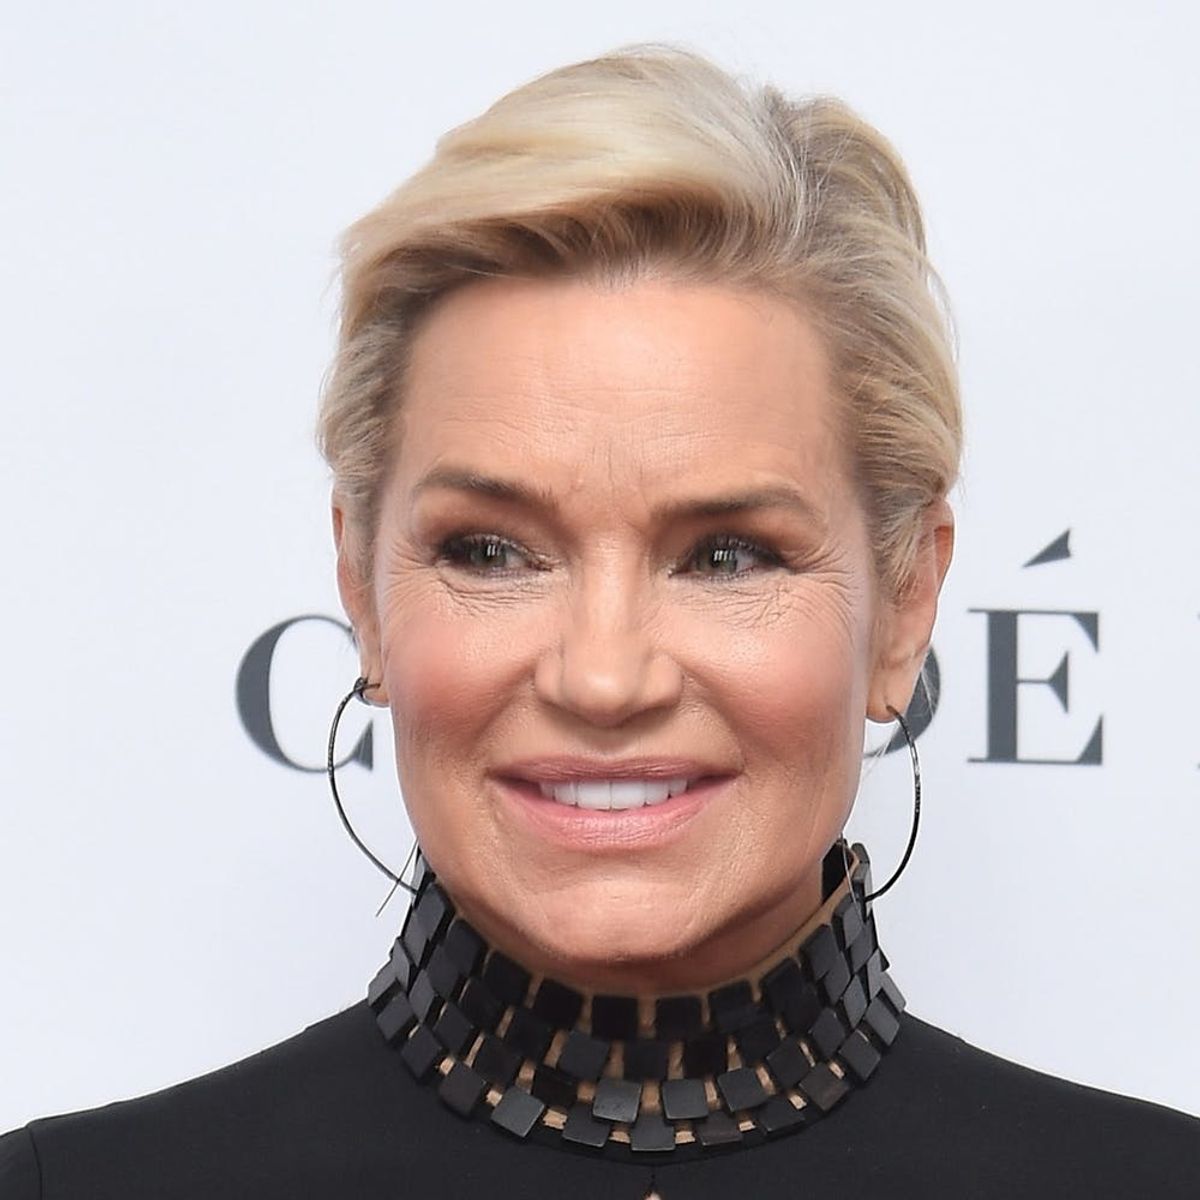 Yolanda Hadid Will Return to Reality TV With a Brand New Modeling Competition Show